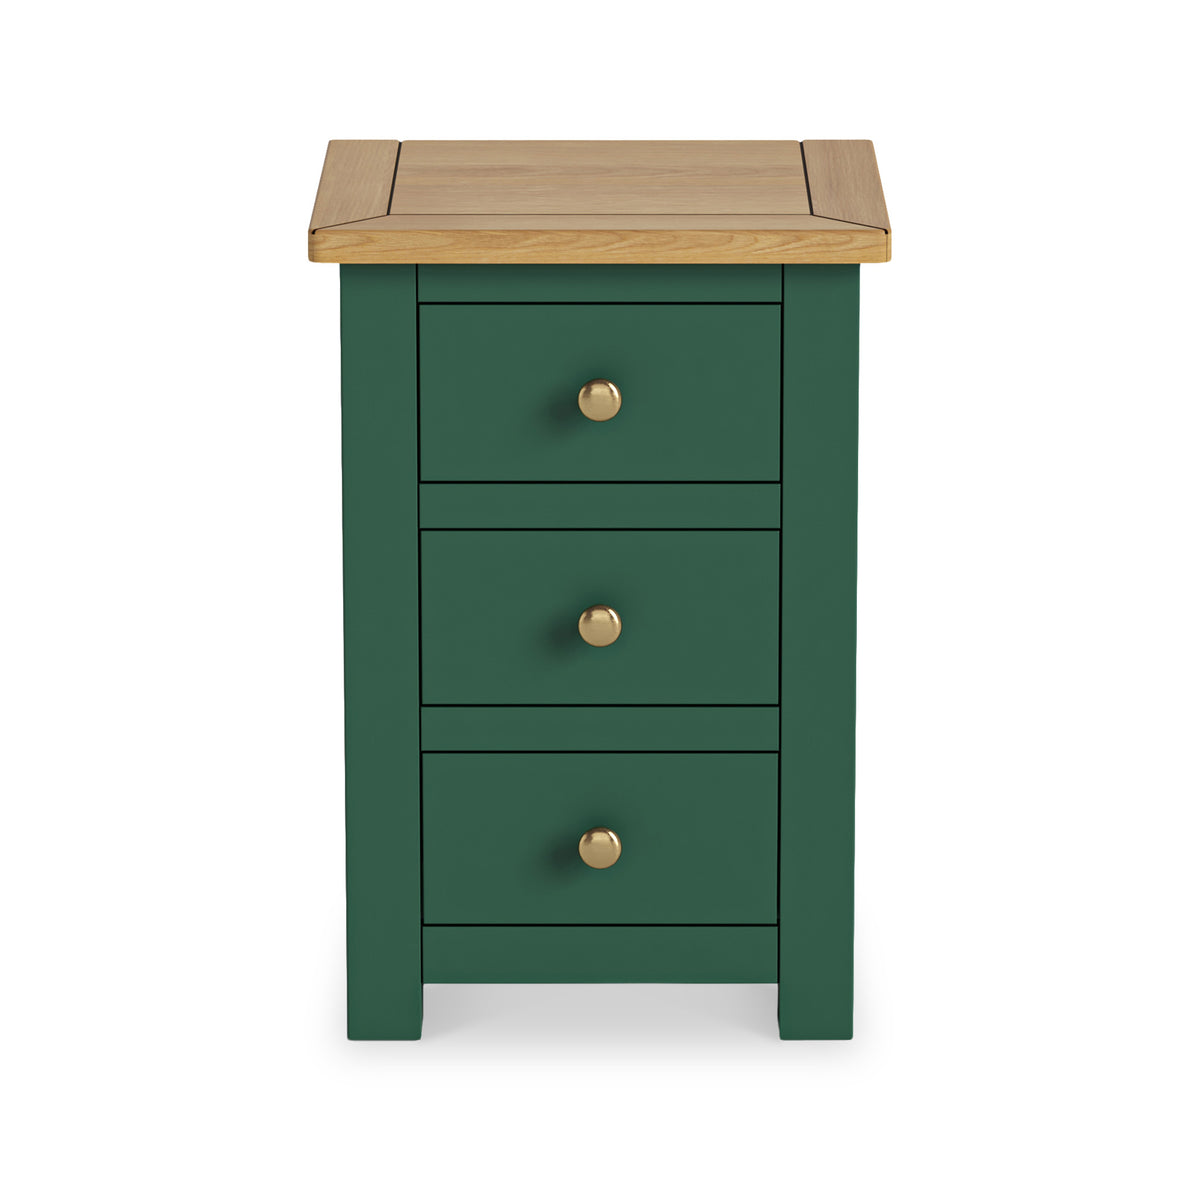 Duchy Puck Green 3 Drawer Bedside Cabinet with Oak Top